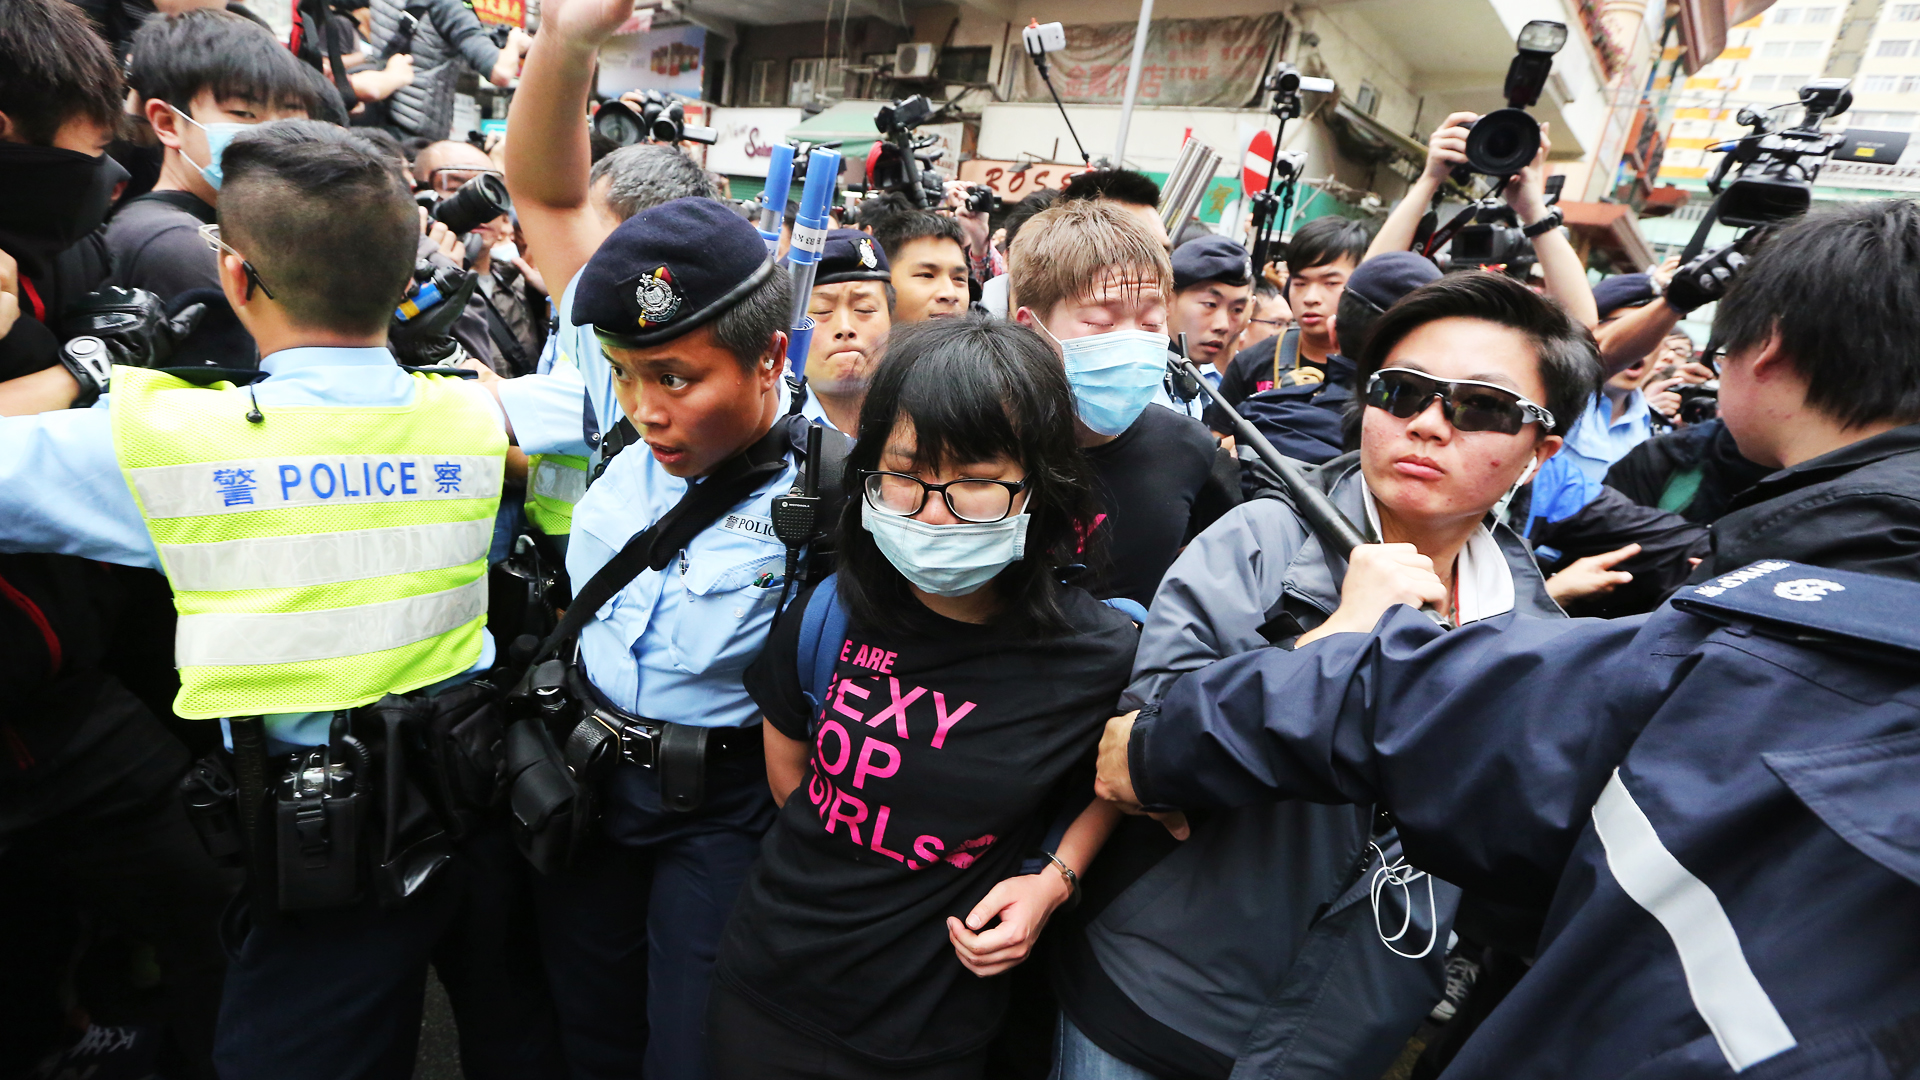 He touched me': Woman protester counters Hong Kong policeman's claim she  'attacked' him with her breast